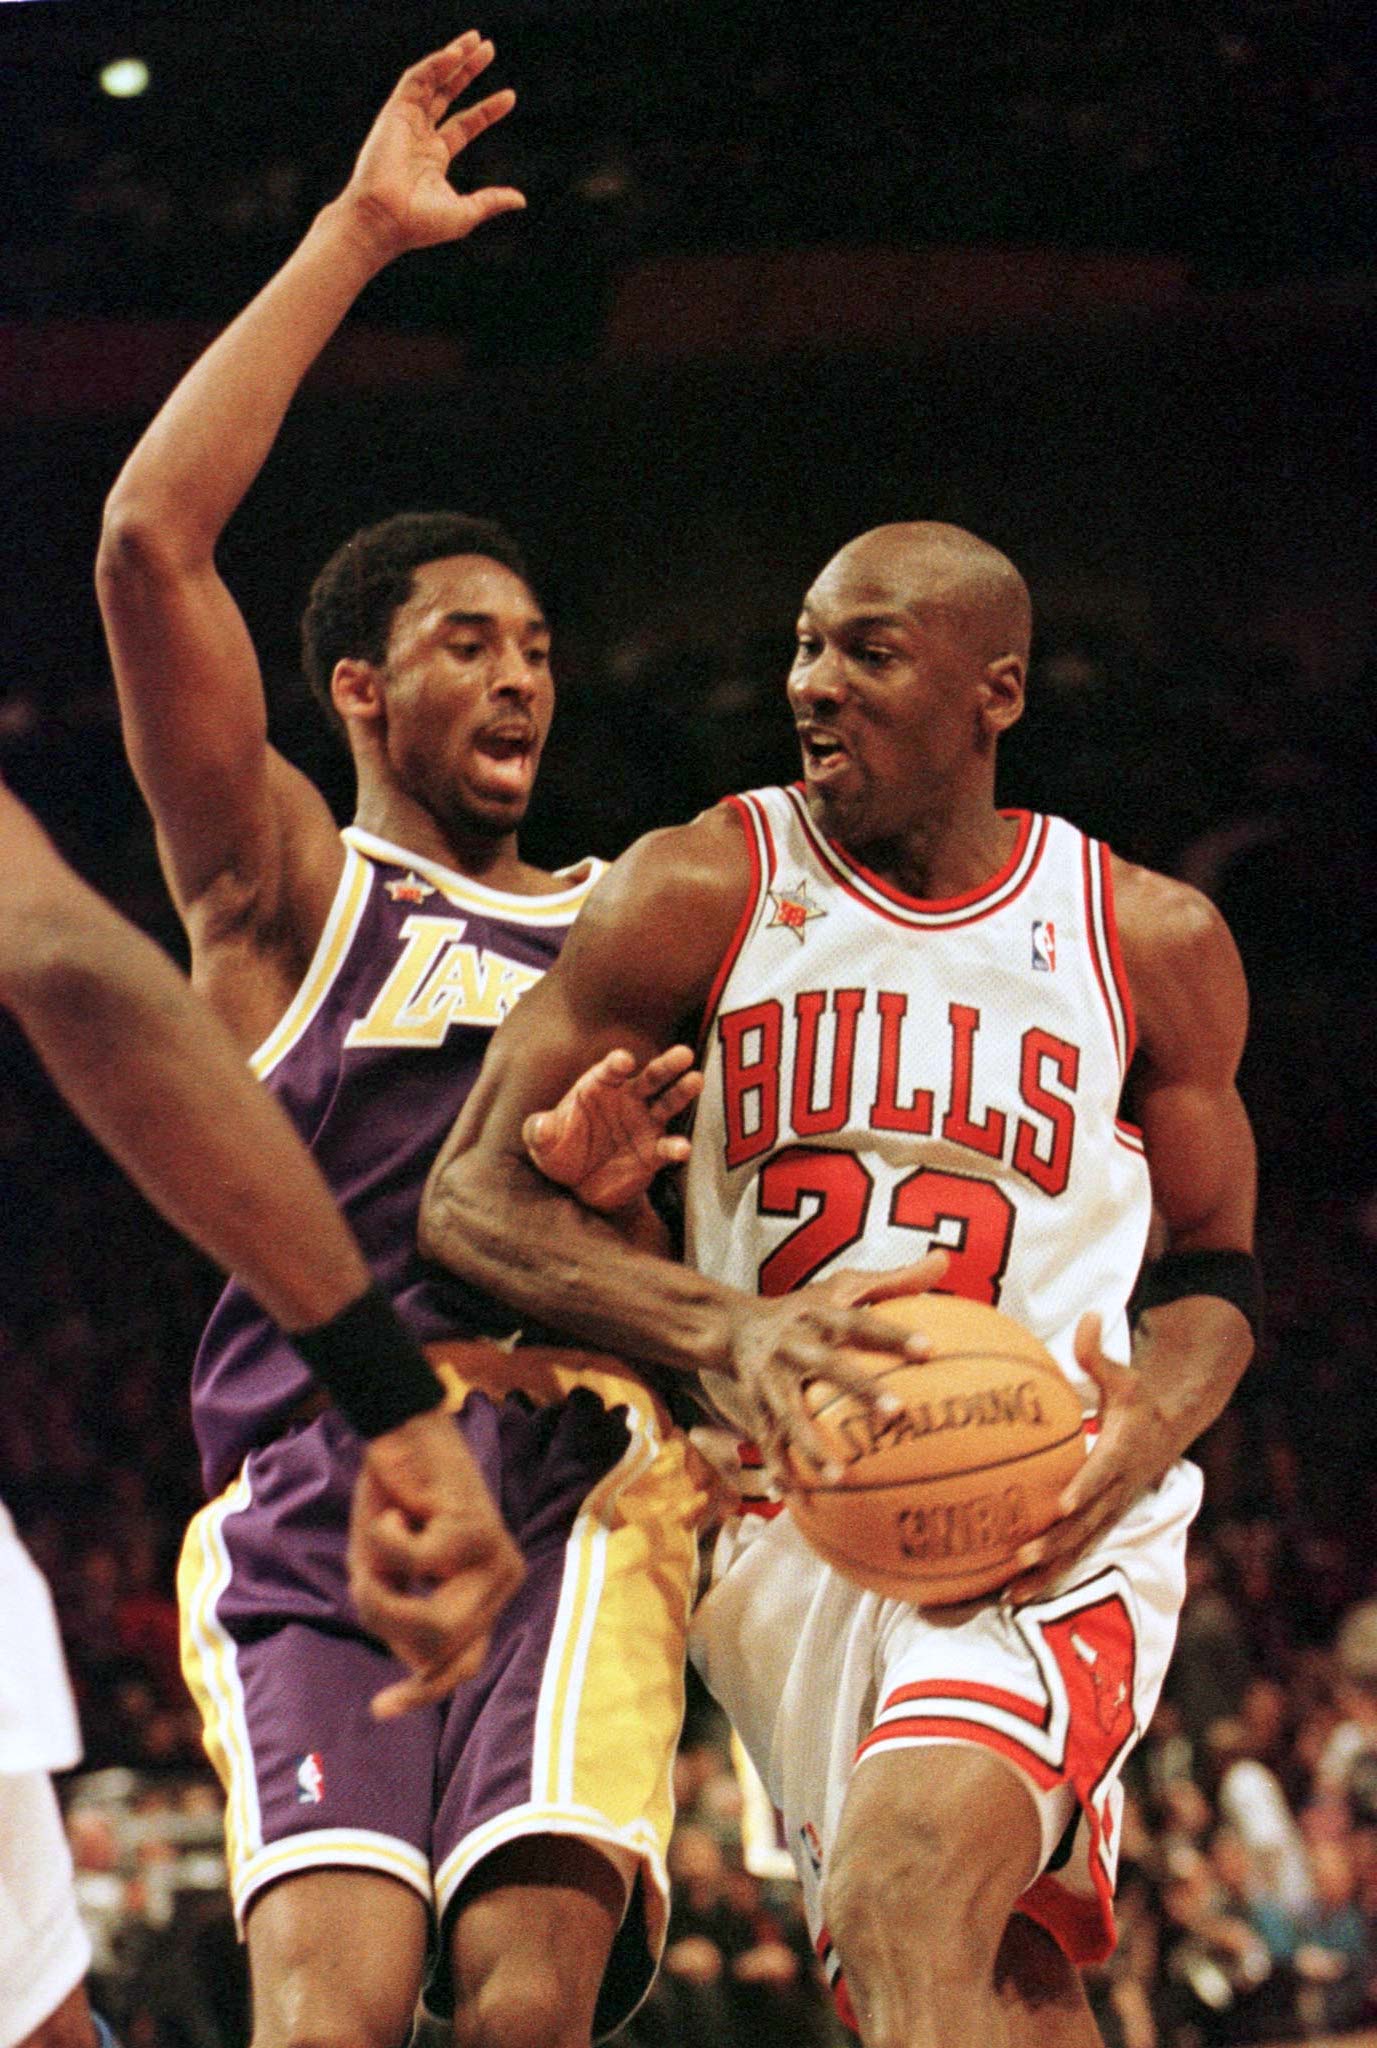 Chicago Bulls Michael Jordan, (R) playing for the Eastern Conference, moves past Los Angeles Lakers Kobe Bryant of the Western Division, in the second half of the NBA All-Star game at Madison Square Garden in New York February 8. The 19-year-old Bryant has been called "the next Jordan" for his flamboyant and awe-inspiring skills. SPORT NBA - RTRB795